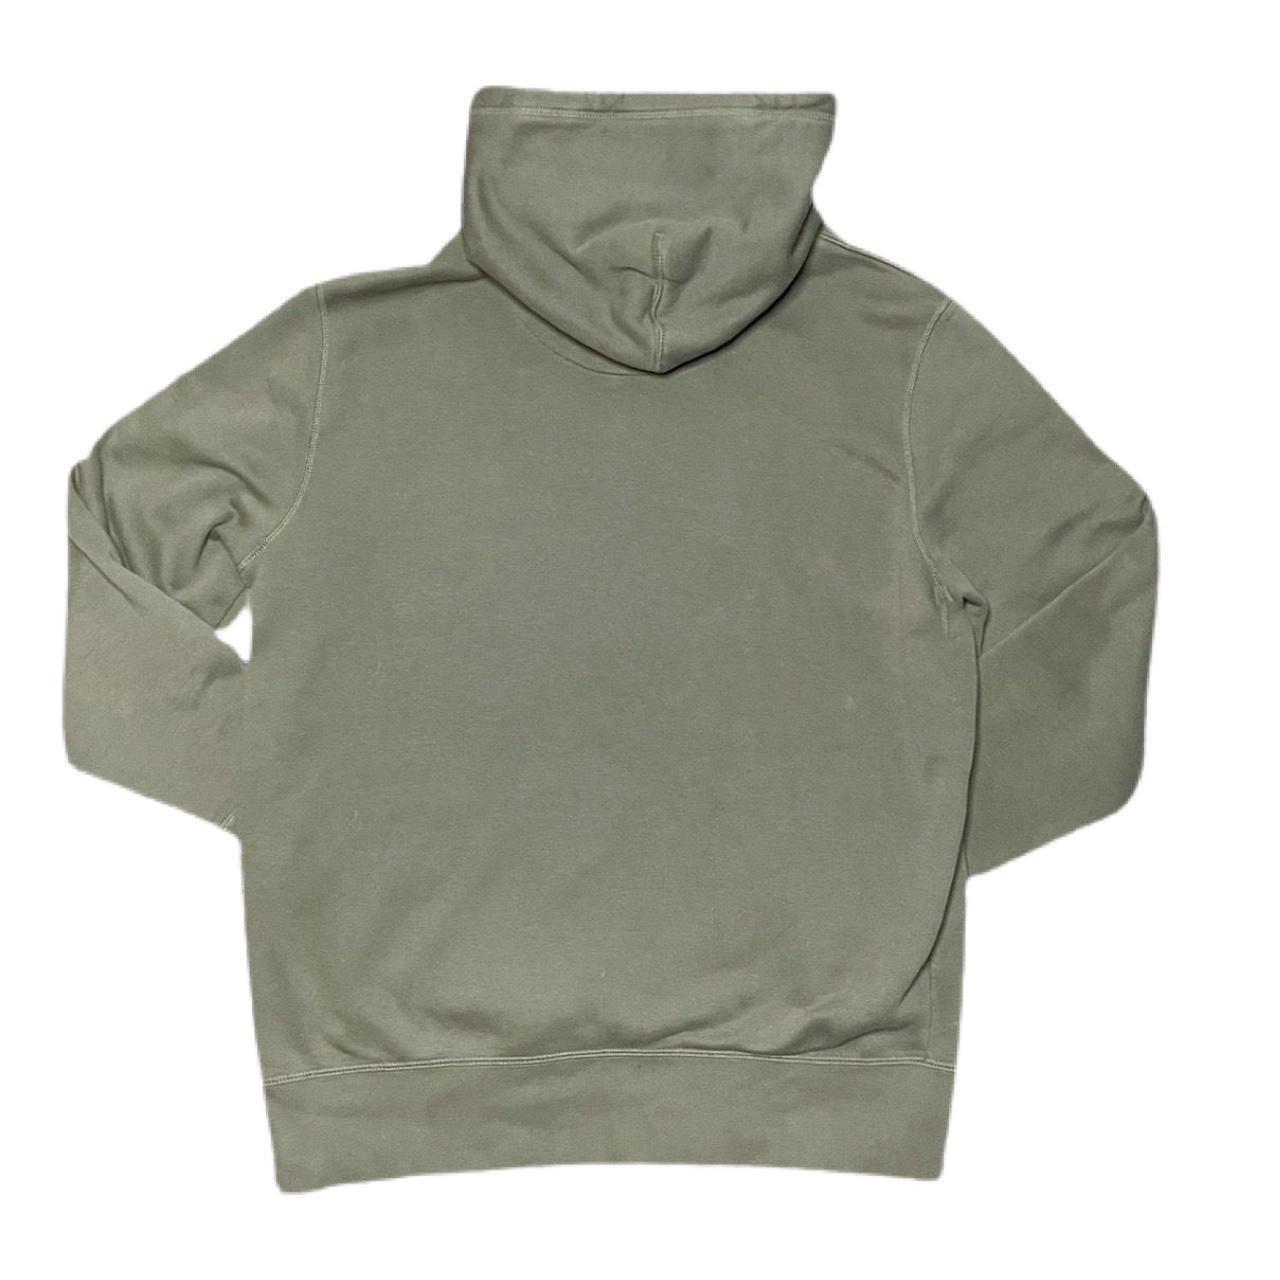 Product Image 2 - Nike Hoodie

- Adult L
- Great